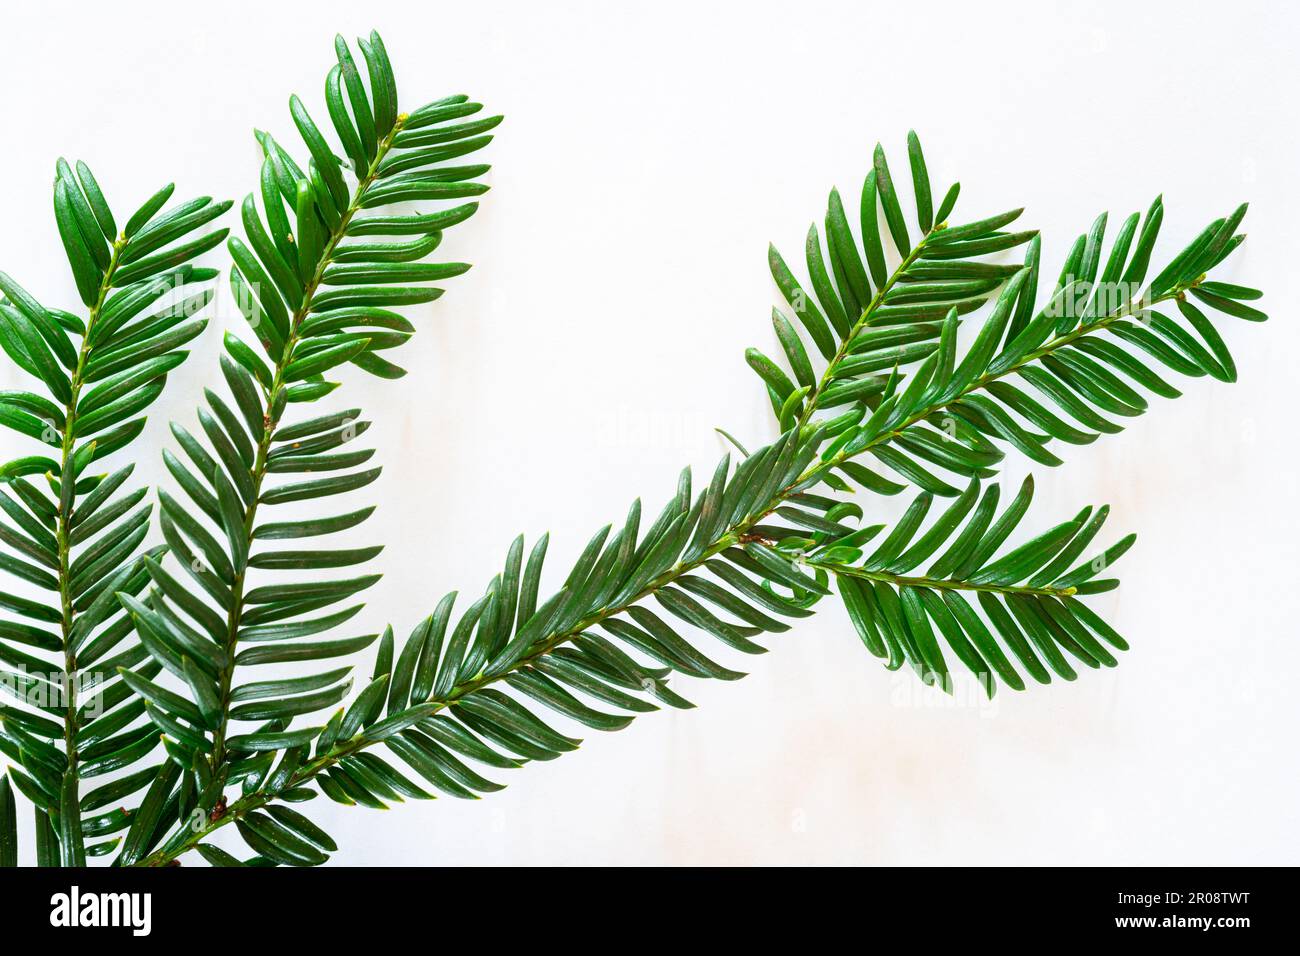 Detailed image of branches with fresh green needles of a Yew tree (Taxus baccata) Stock Photo